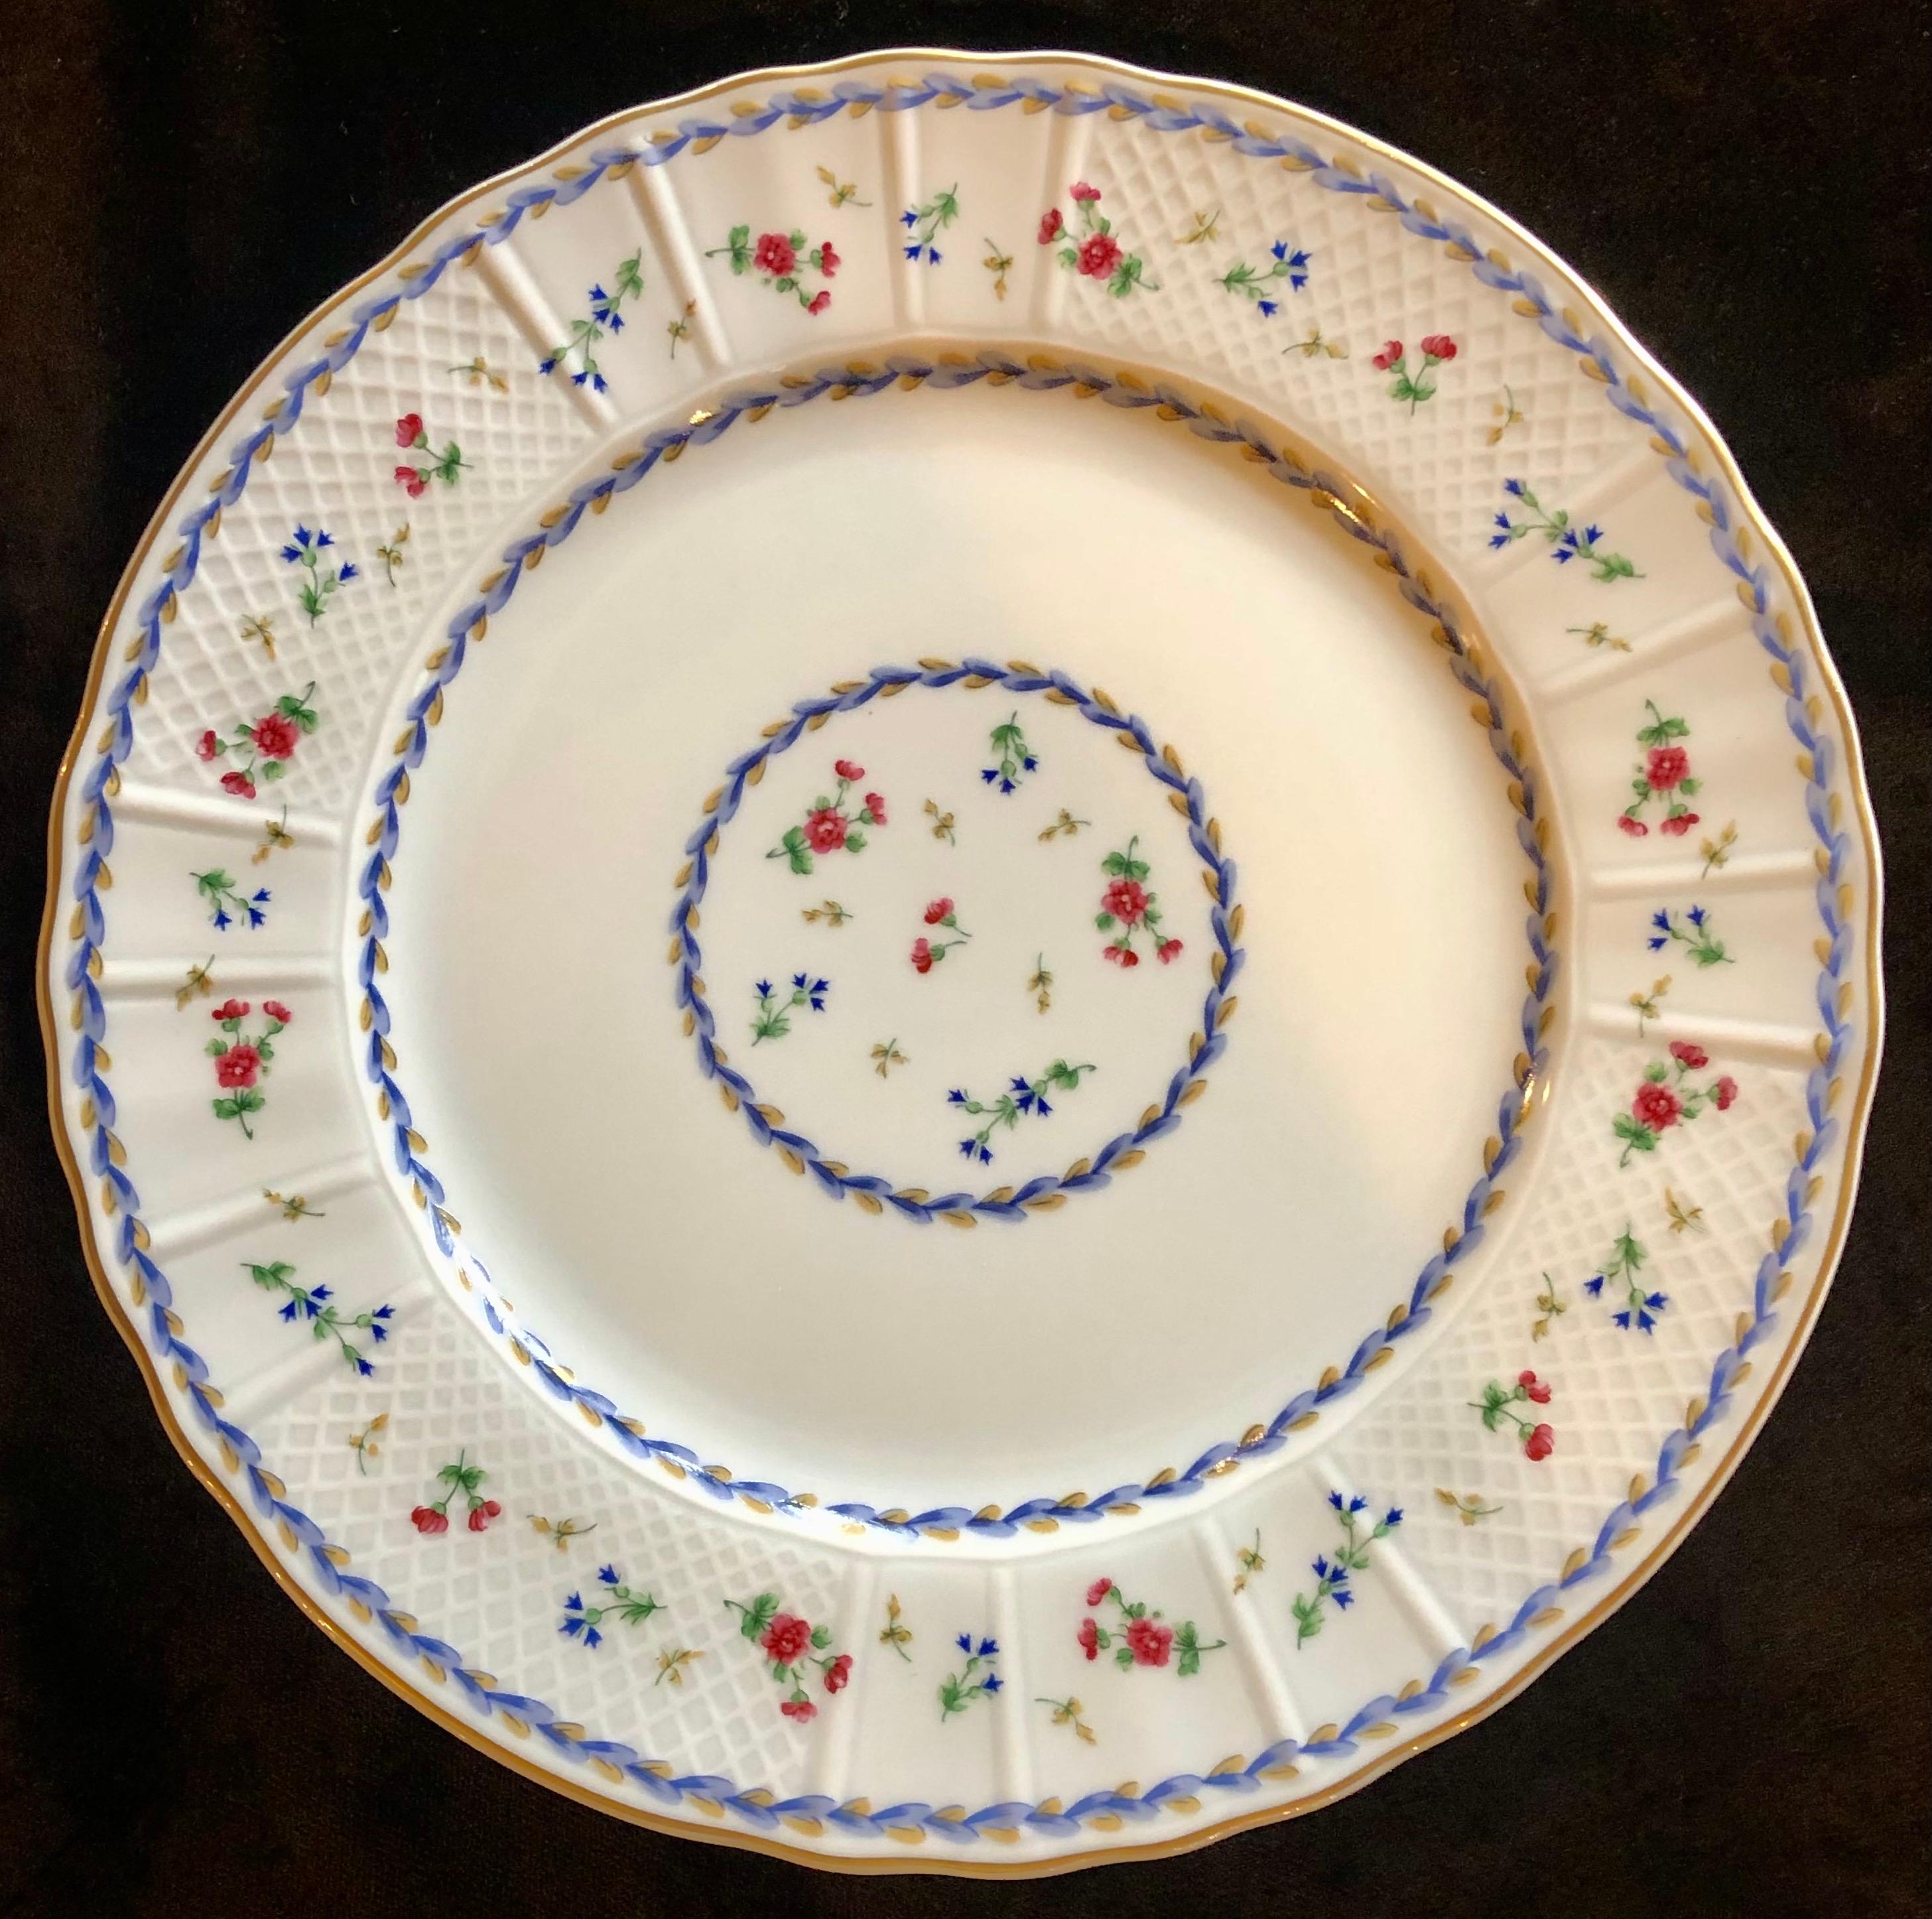 Bernardaud limoge Artois blue or green dinnerware with tea cups and saucers, (1974-2006)
Decorated with laurel wreath and flowers, gold rim on Versailles shape. This fine complete service for 11 (with extras) dinner set was discontinued in 2006.